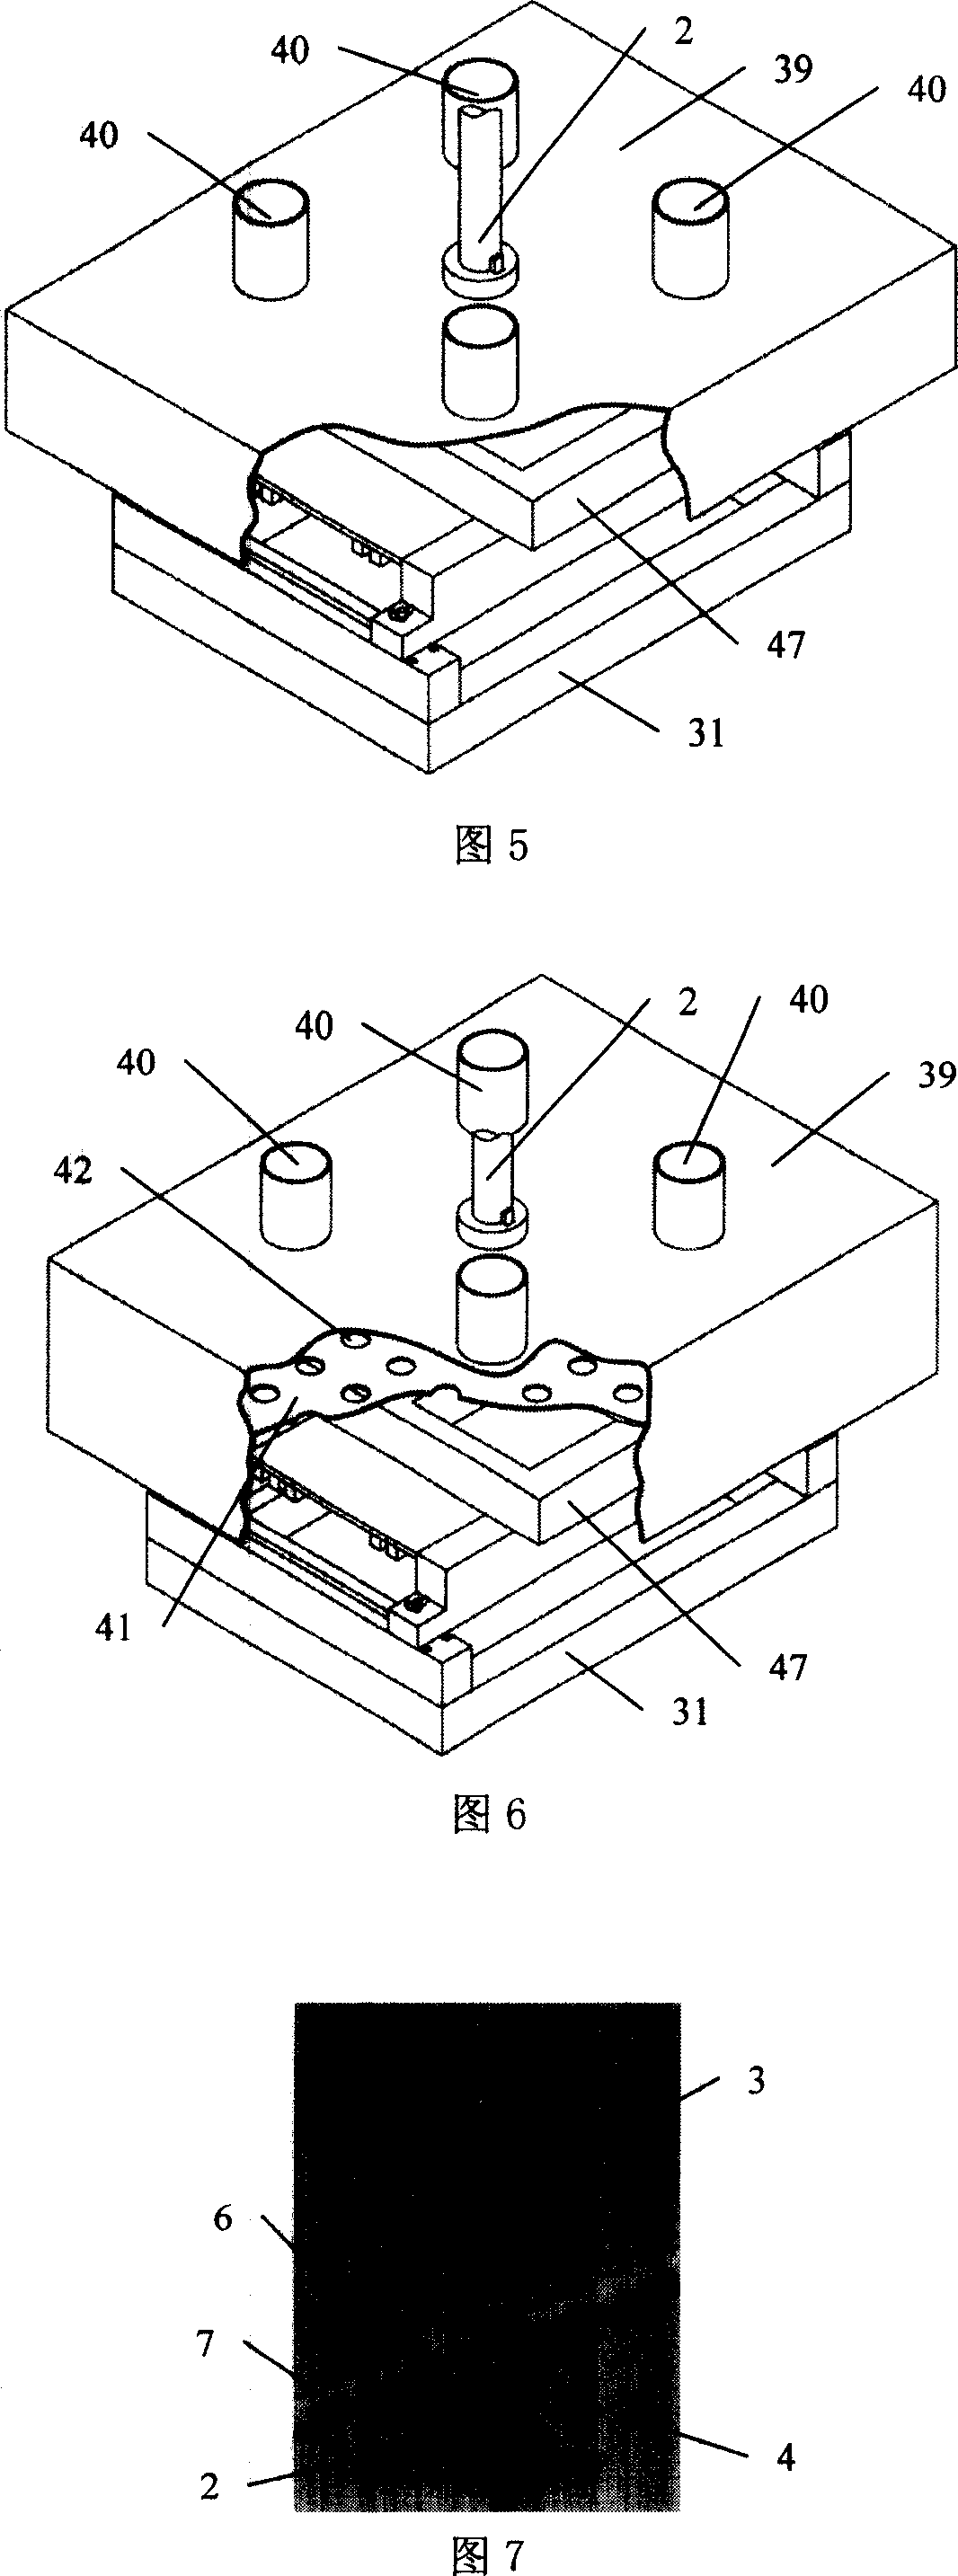 Method and equipment for disassembling circuit board using non-contacted impact